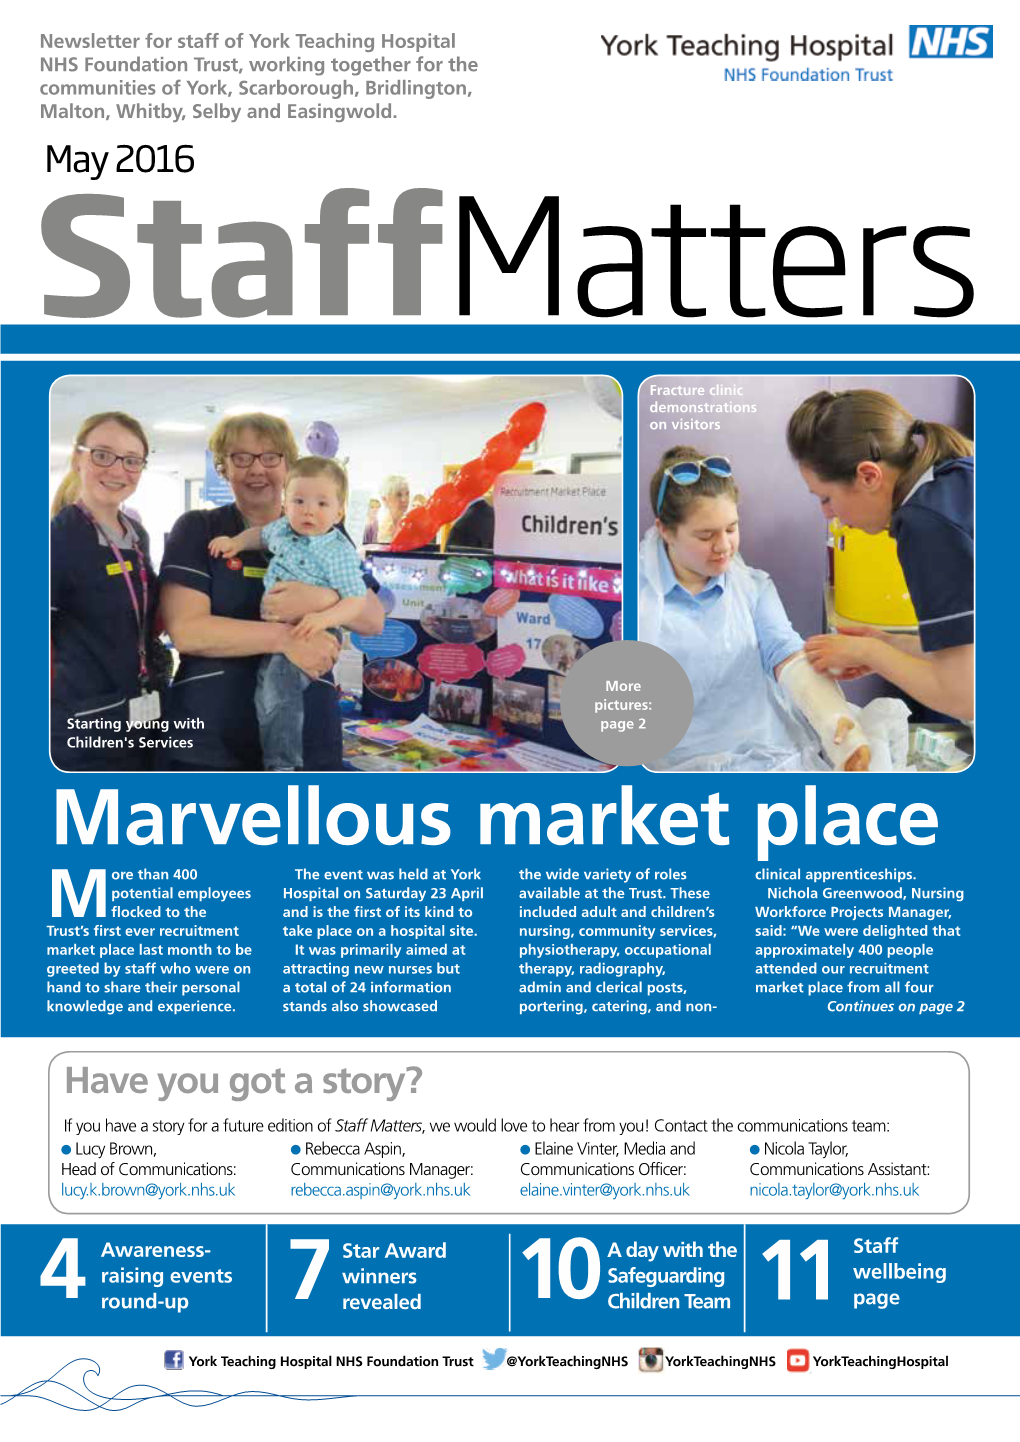 May 2016 Staffmatters